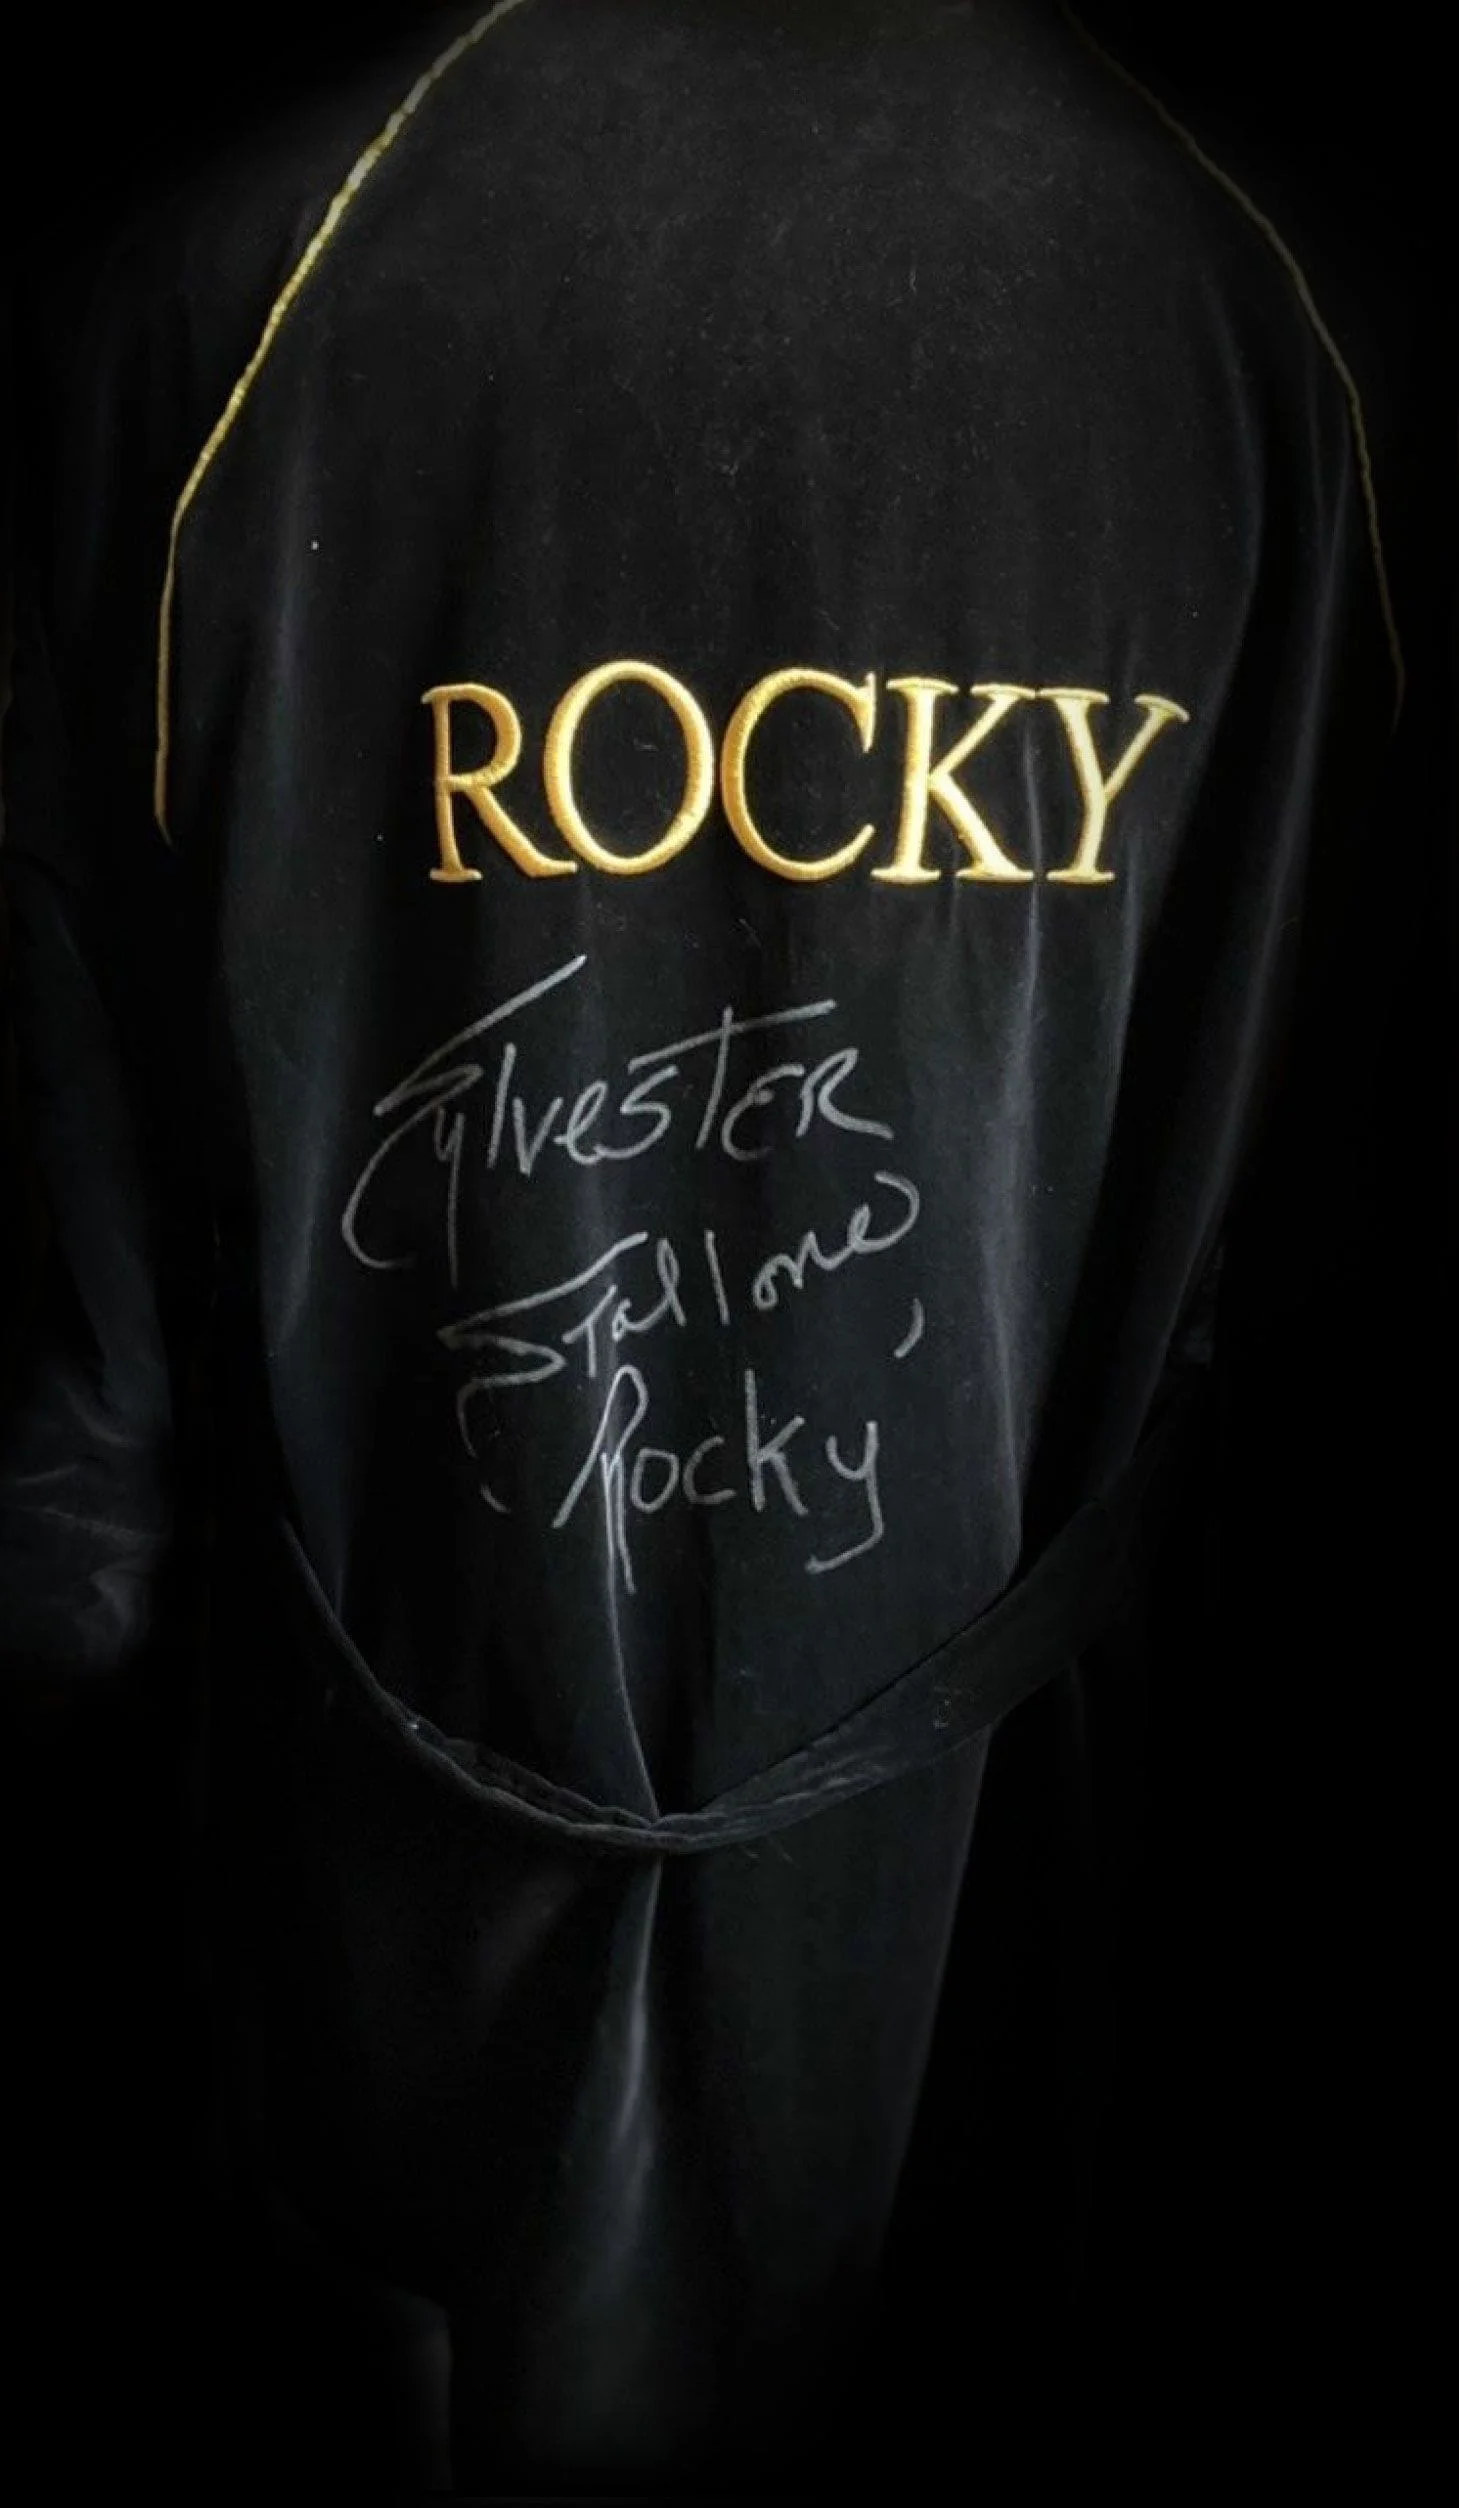 Sylvester Stallone Robe featured in Rocky Balboa